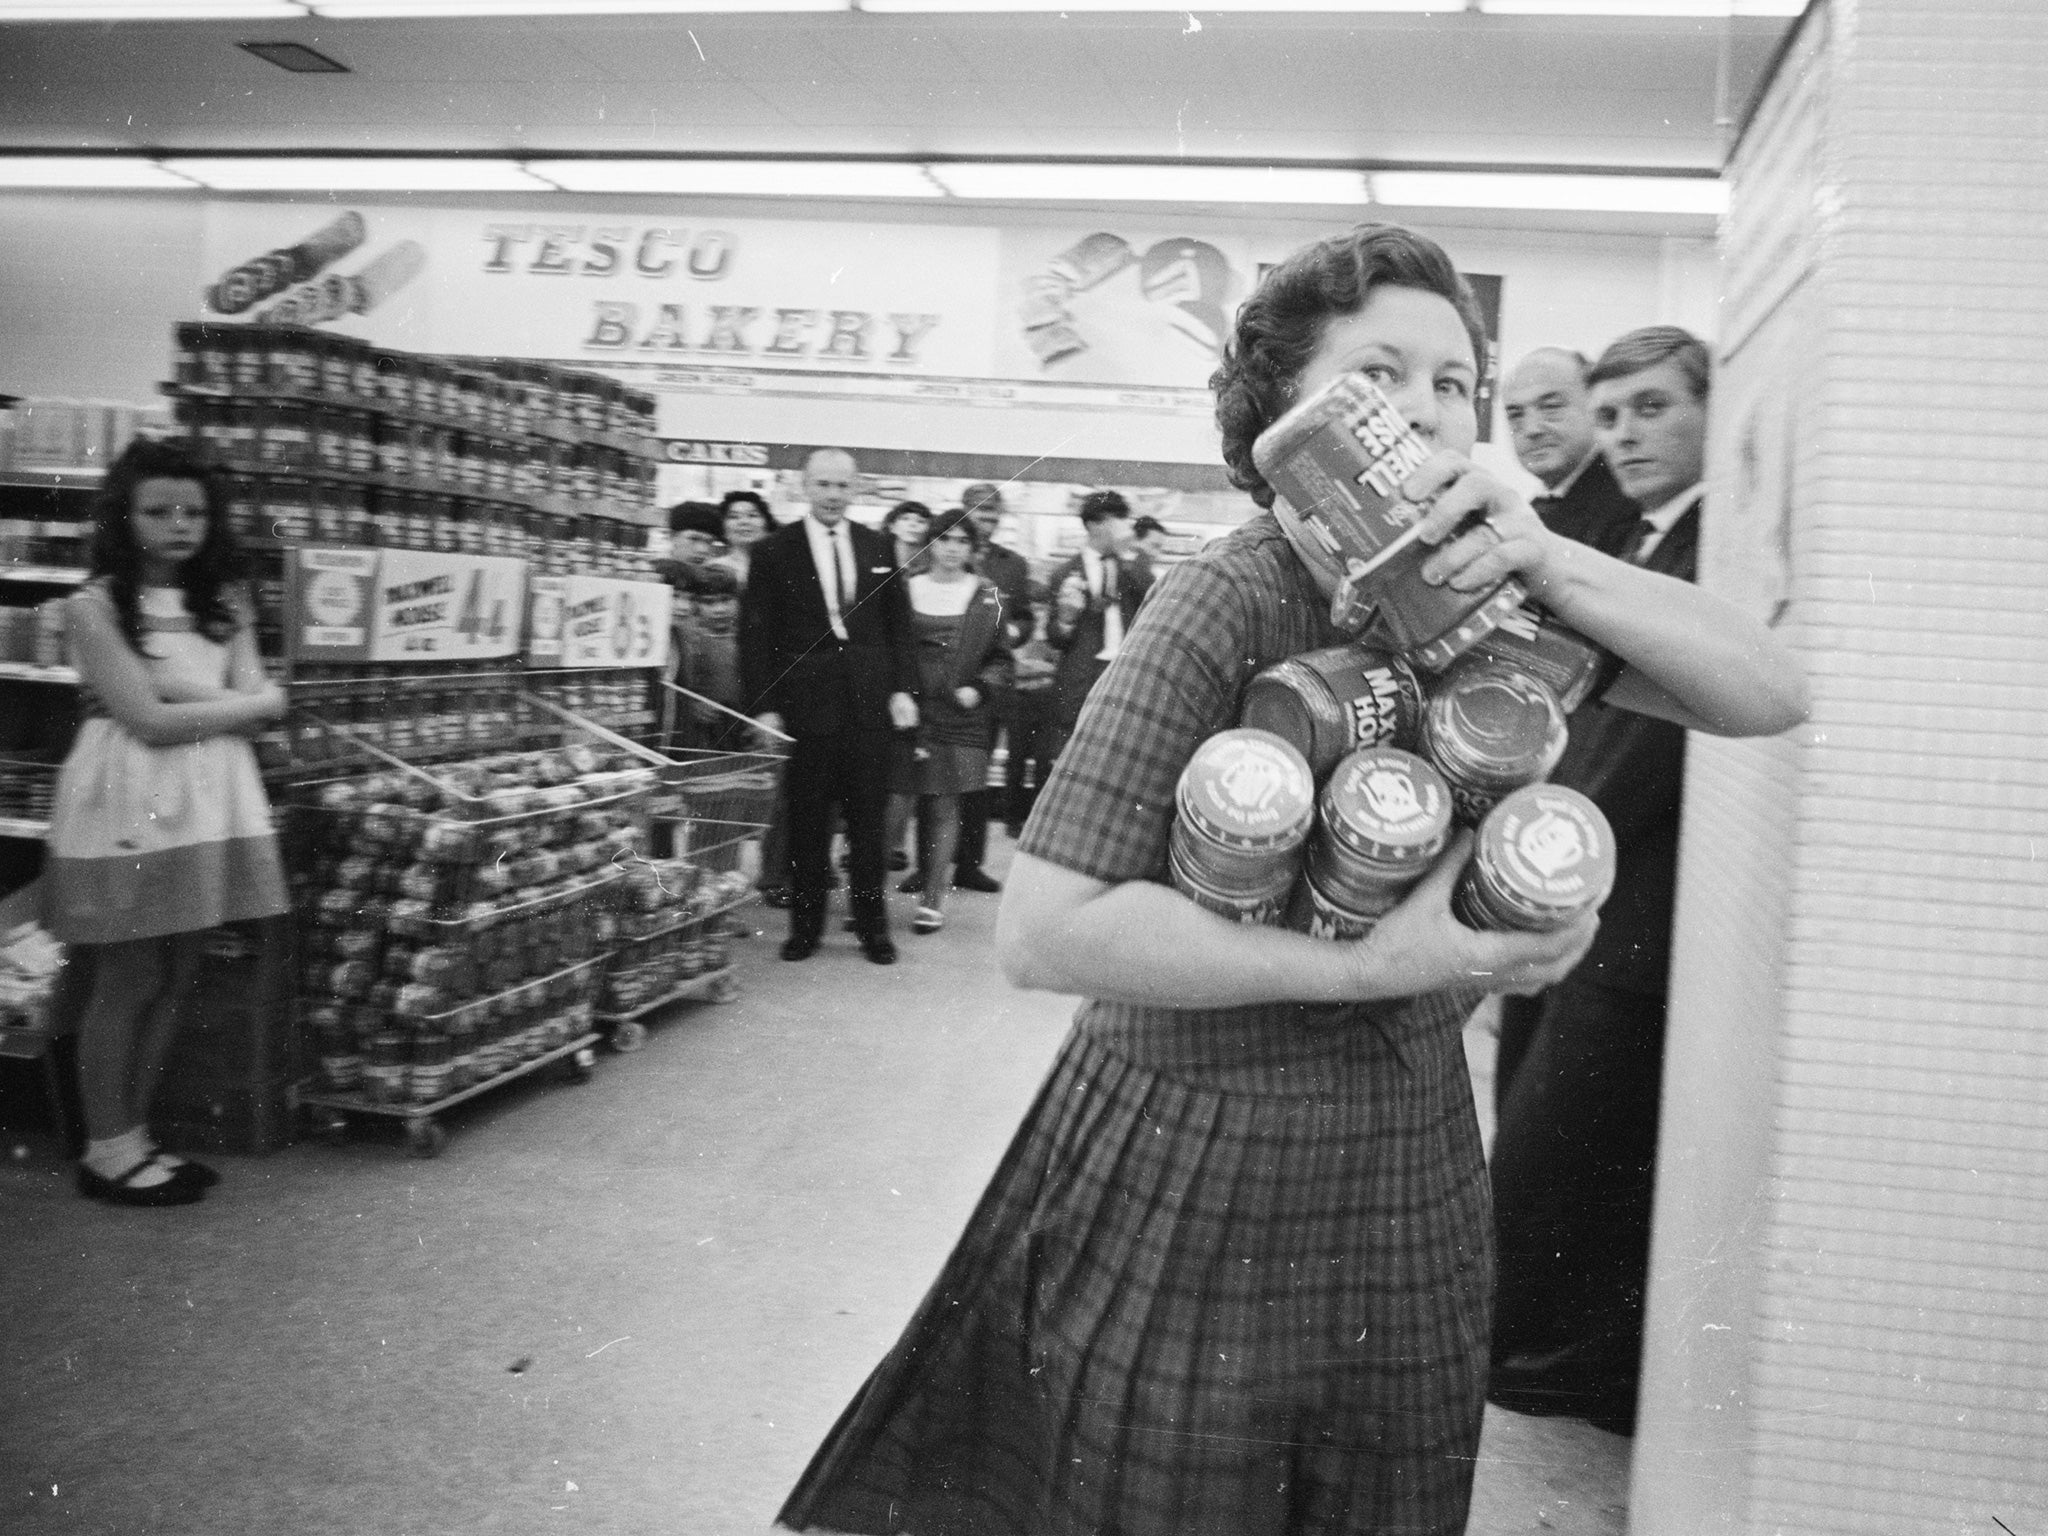 The way we were: consumers used to relish huge choice but now we often want to shop in supermarkets as fast as we can